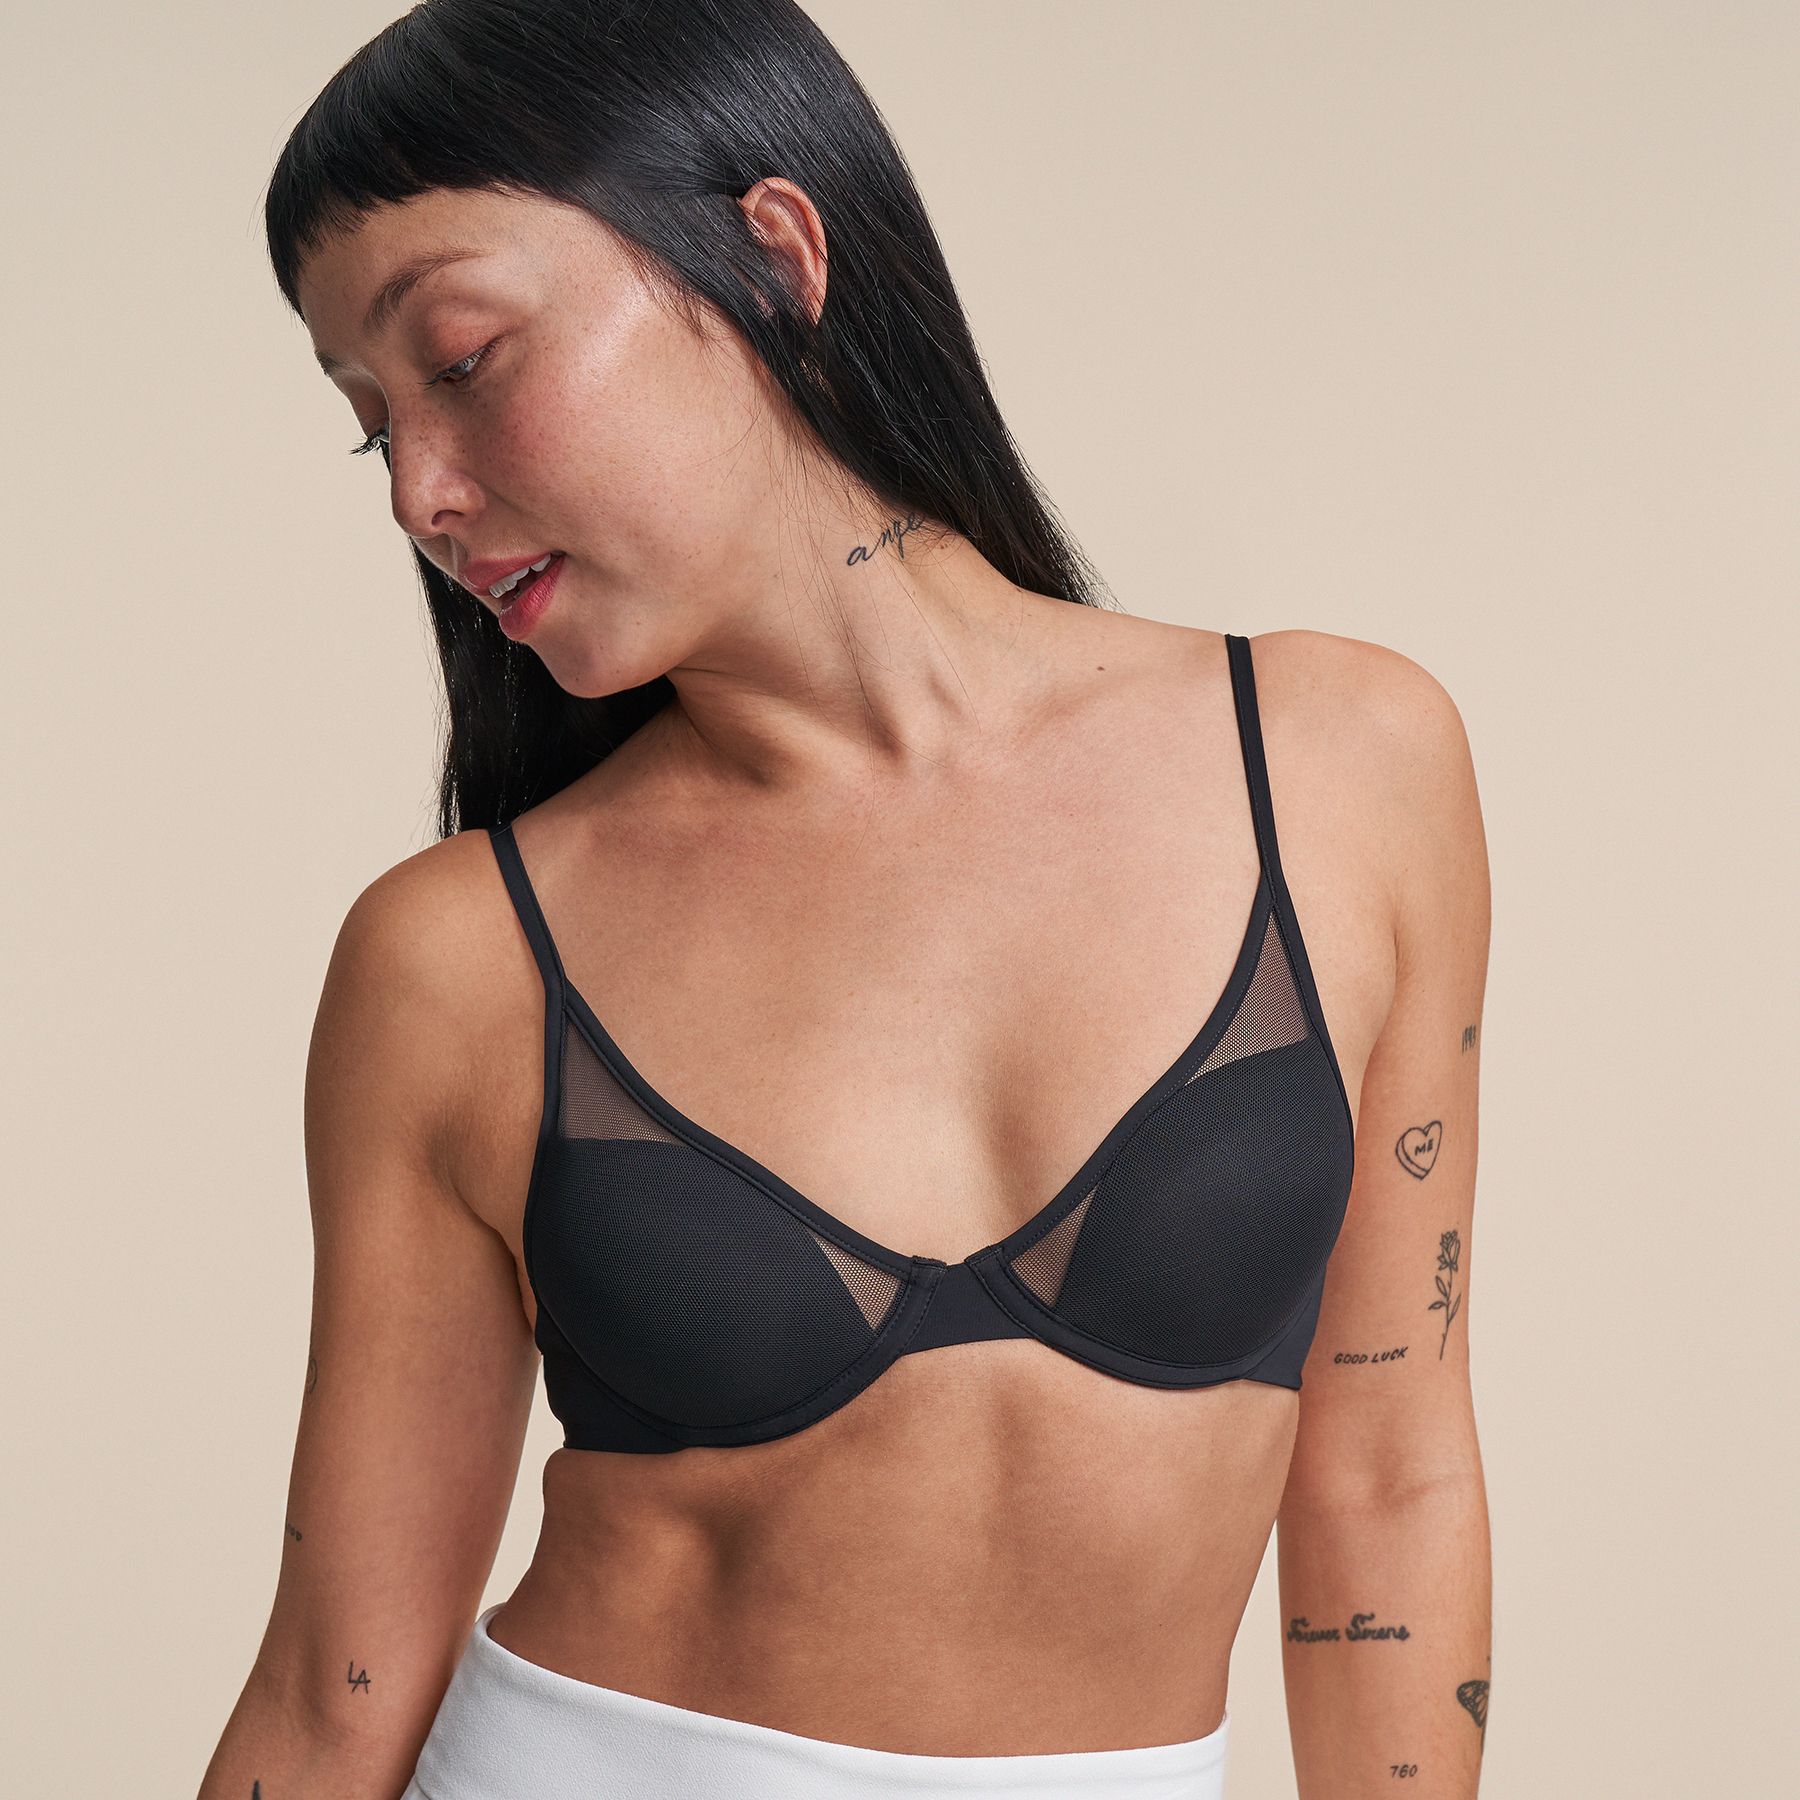 Pepper Bras Fit My Tiny Boobs - Pepper Bra ReviewHelloGiggles